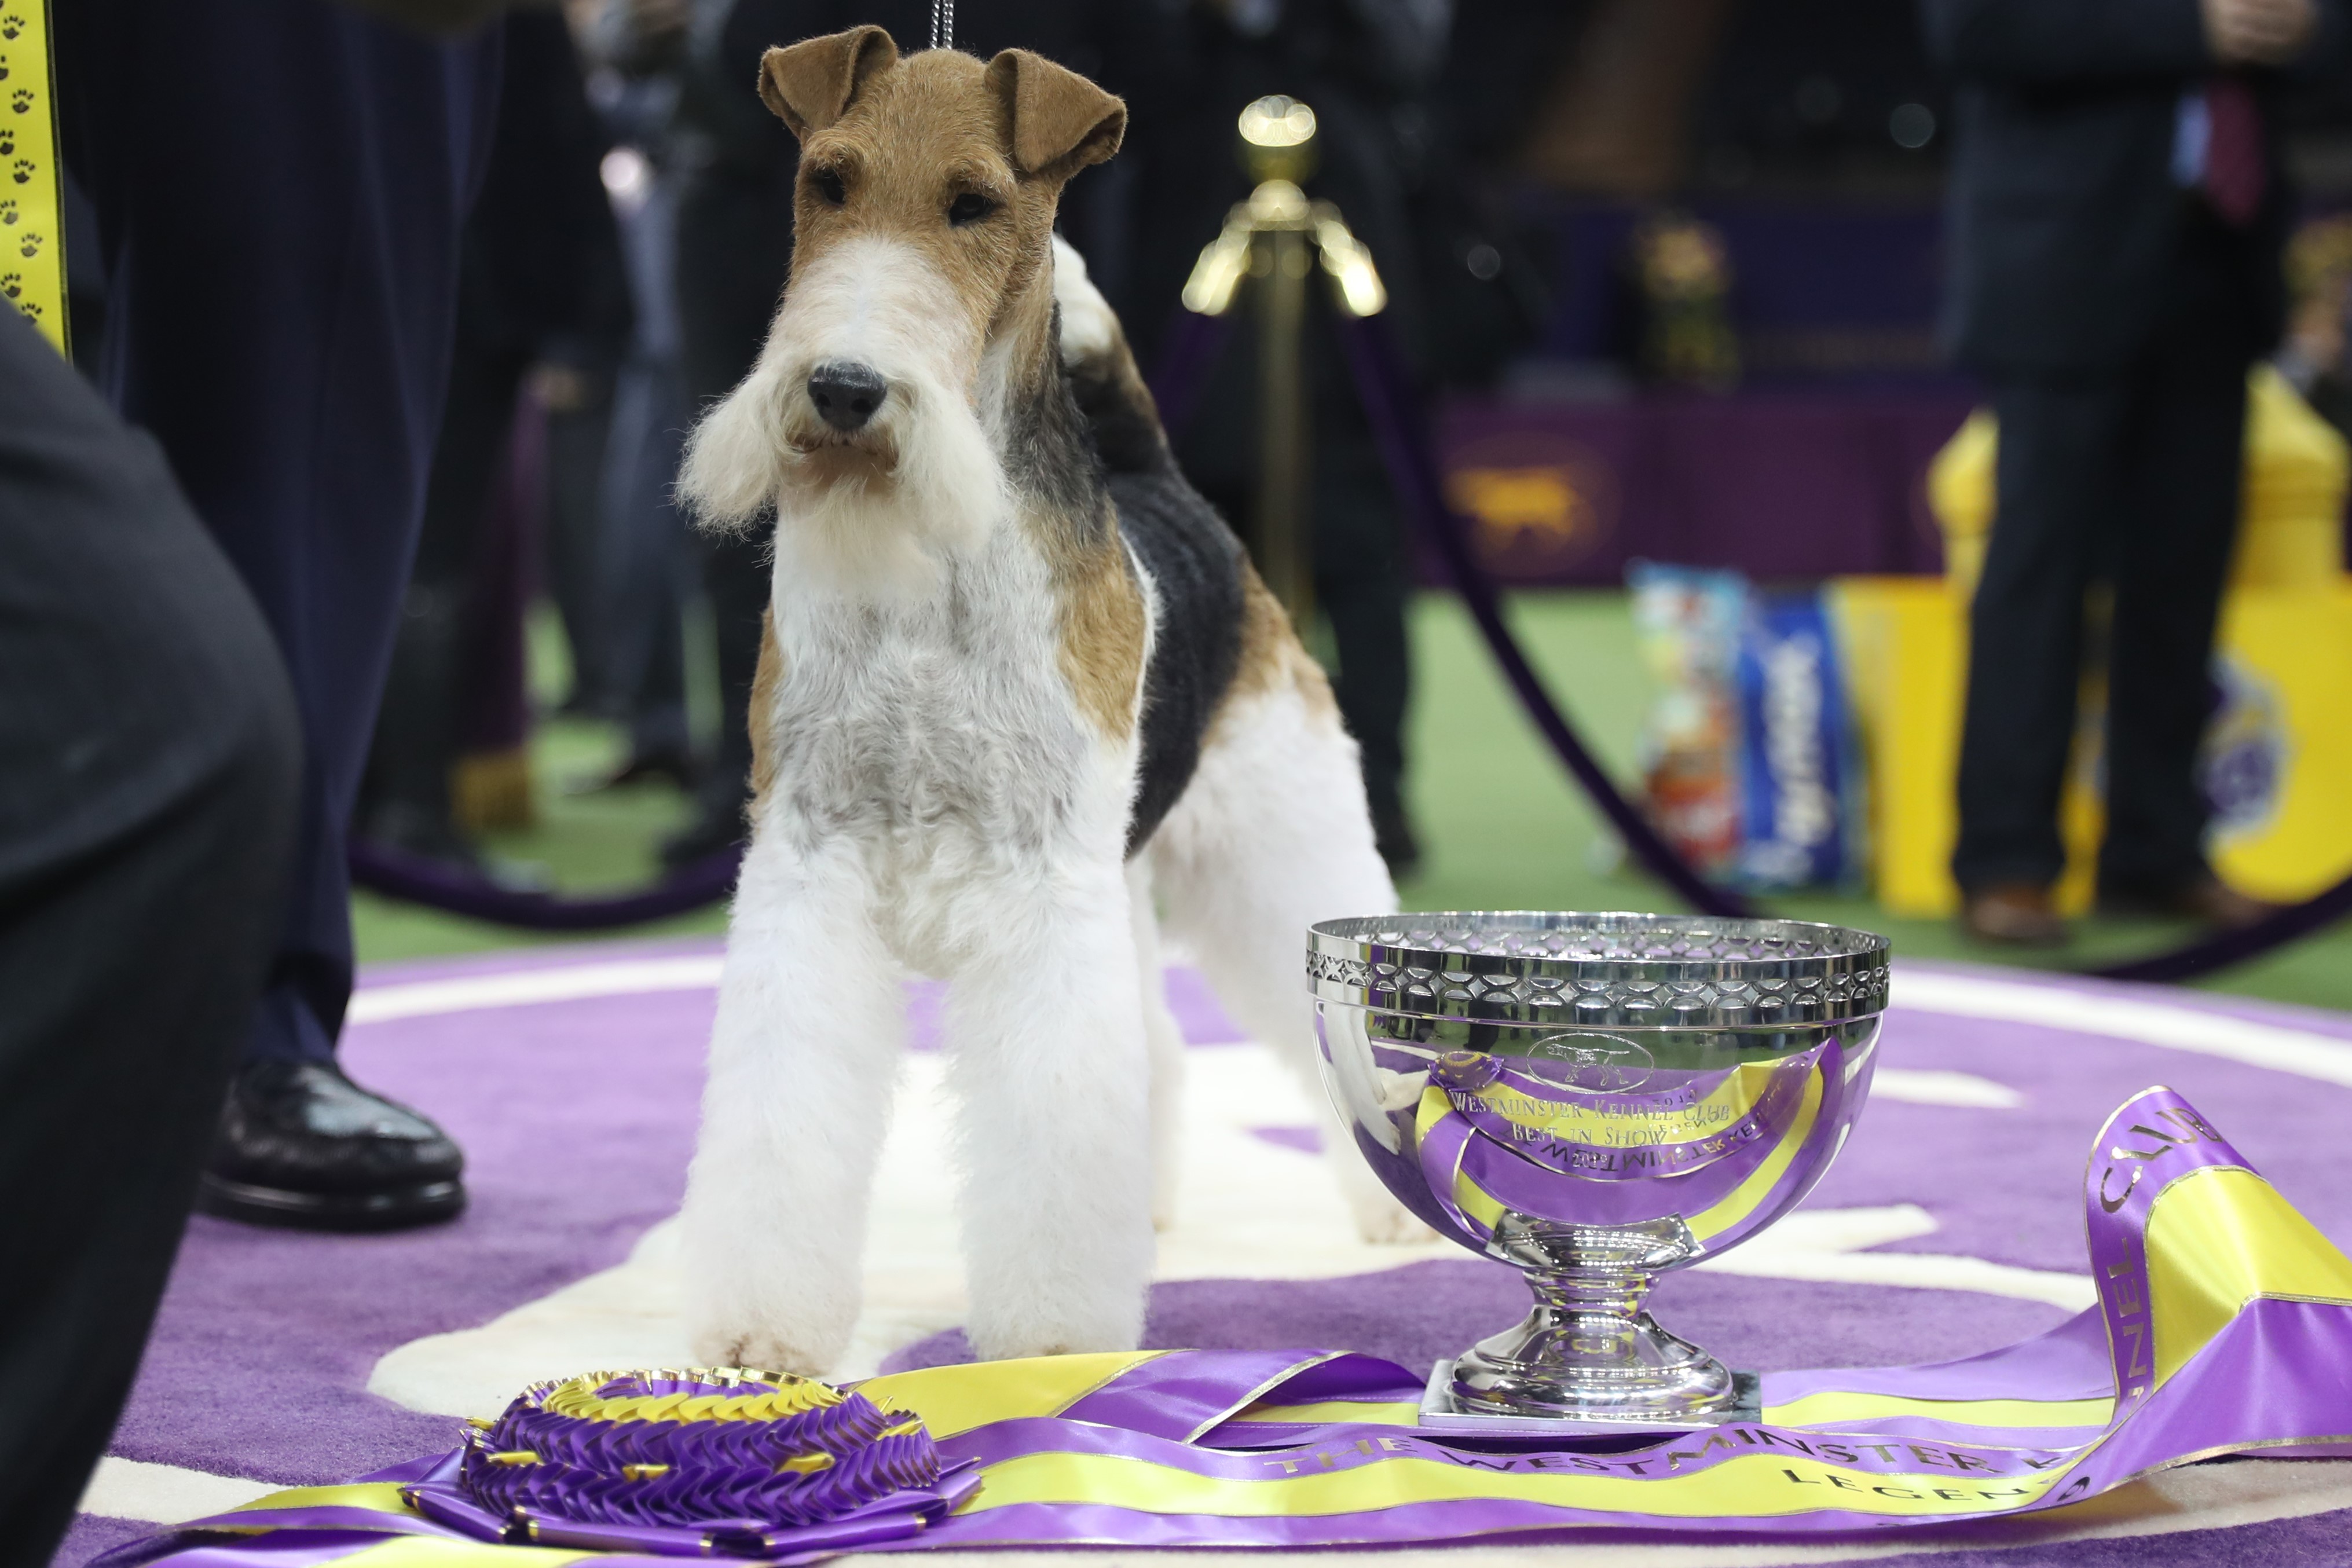 The Westminster Dog Show Winner Gets a Shocking Amount of Prize Money